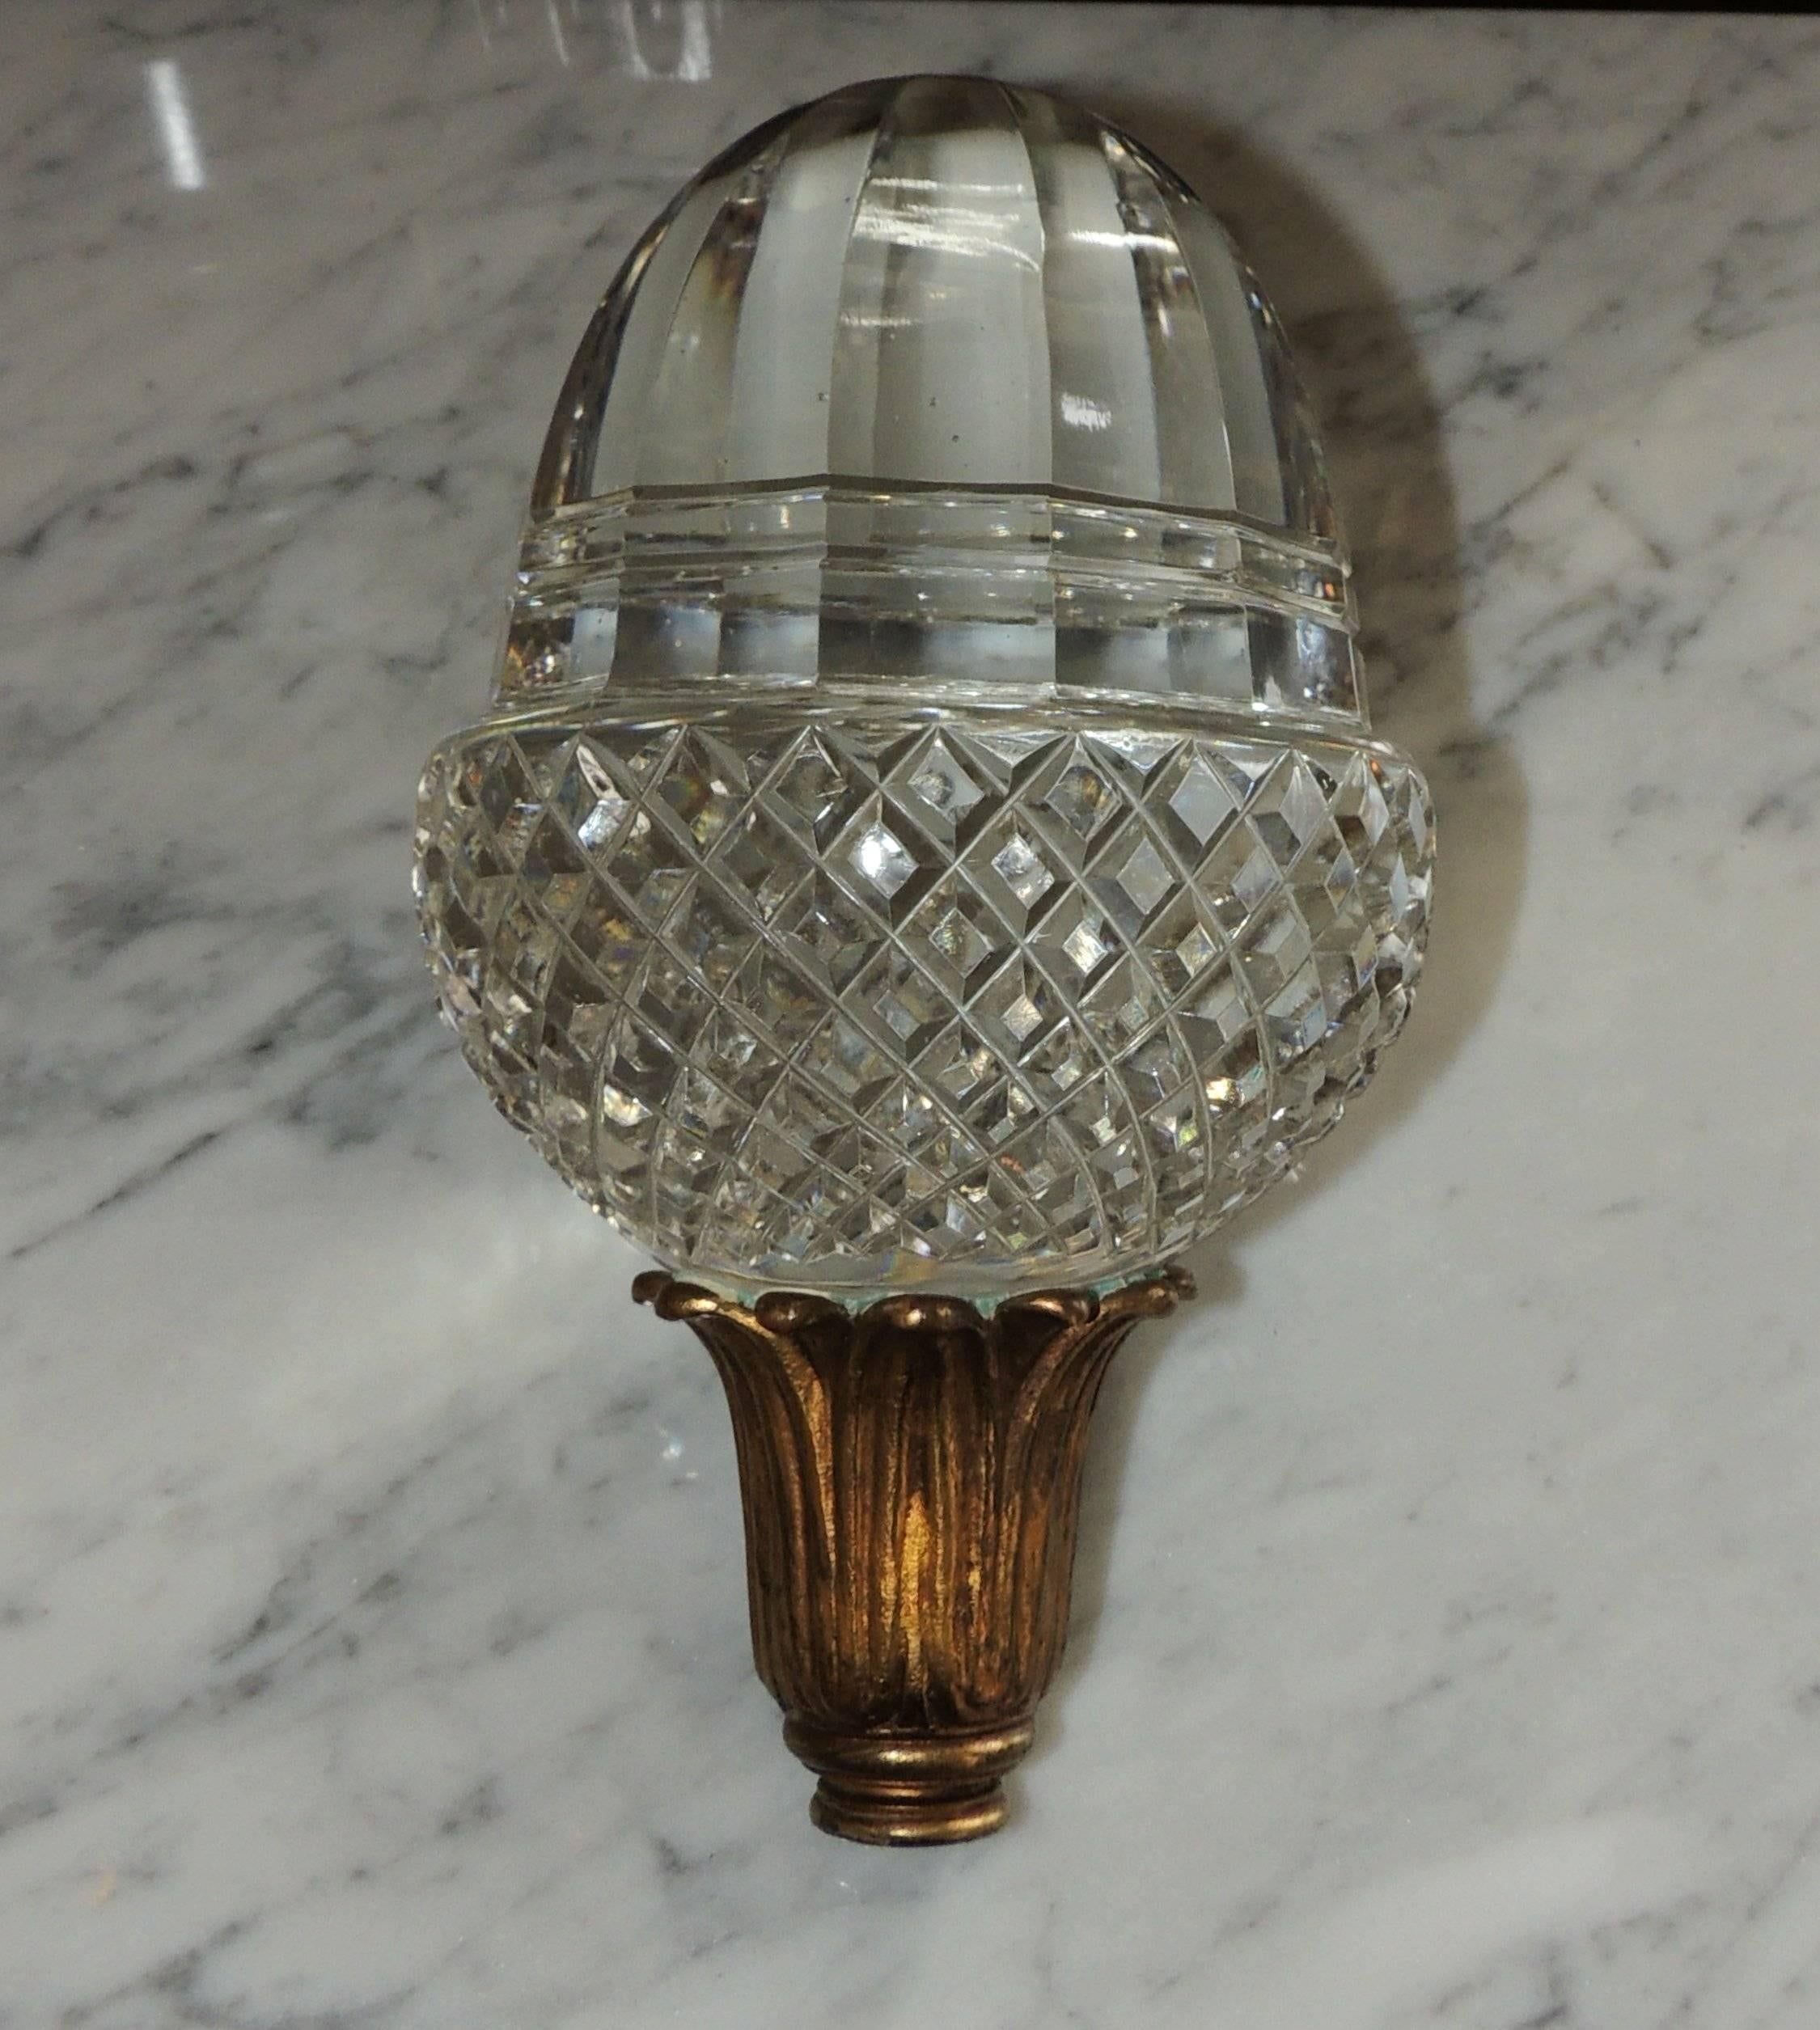 A wonderful extra large vintage crystal finial for the top of a banister cap or newell post on your staircase.

Cut crystal diamond pattern on the bottom and large clear beveled crystal top.
The bottom is a wonderful doré bronze leaf cup